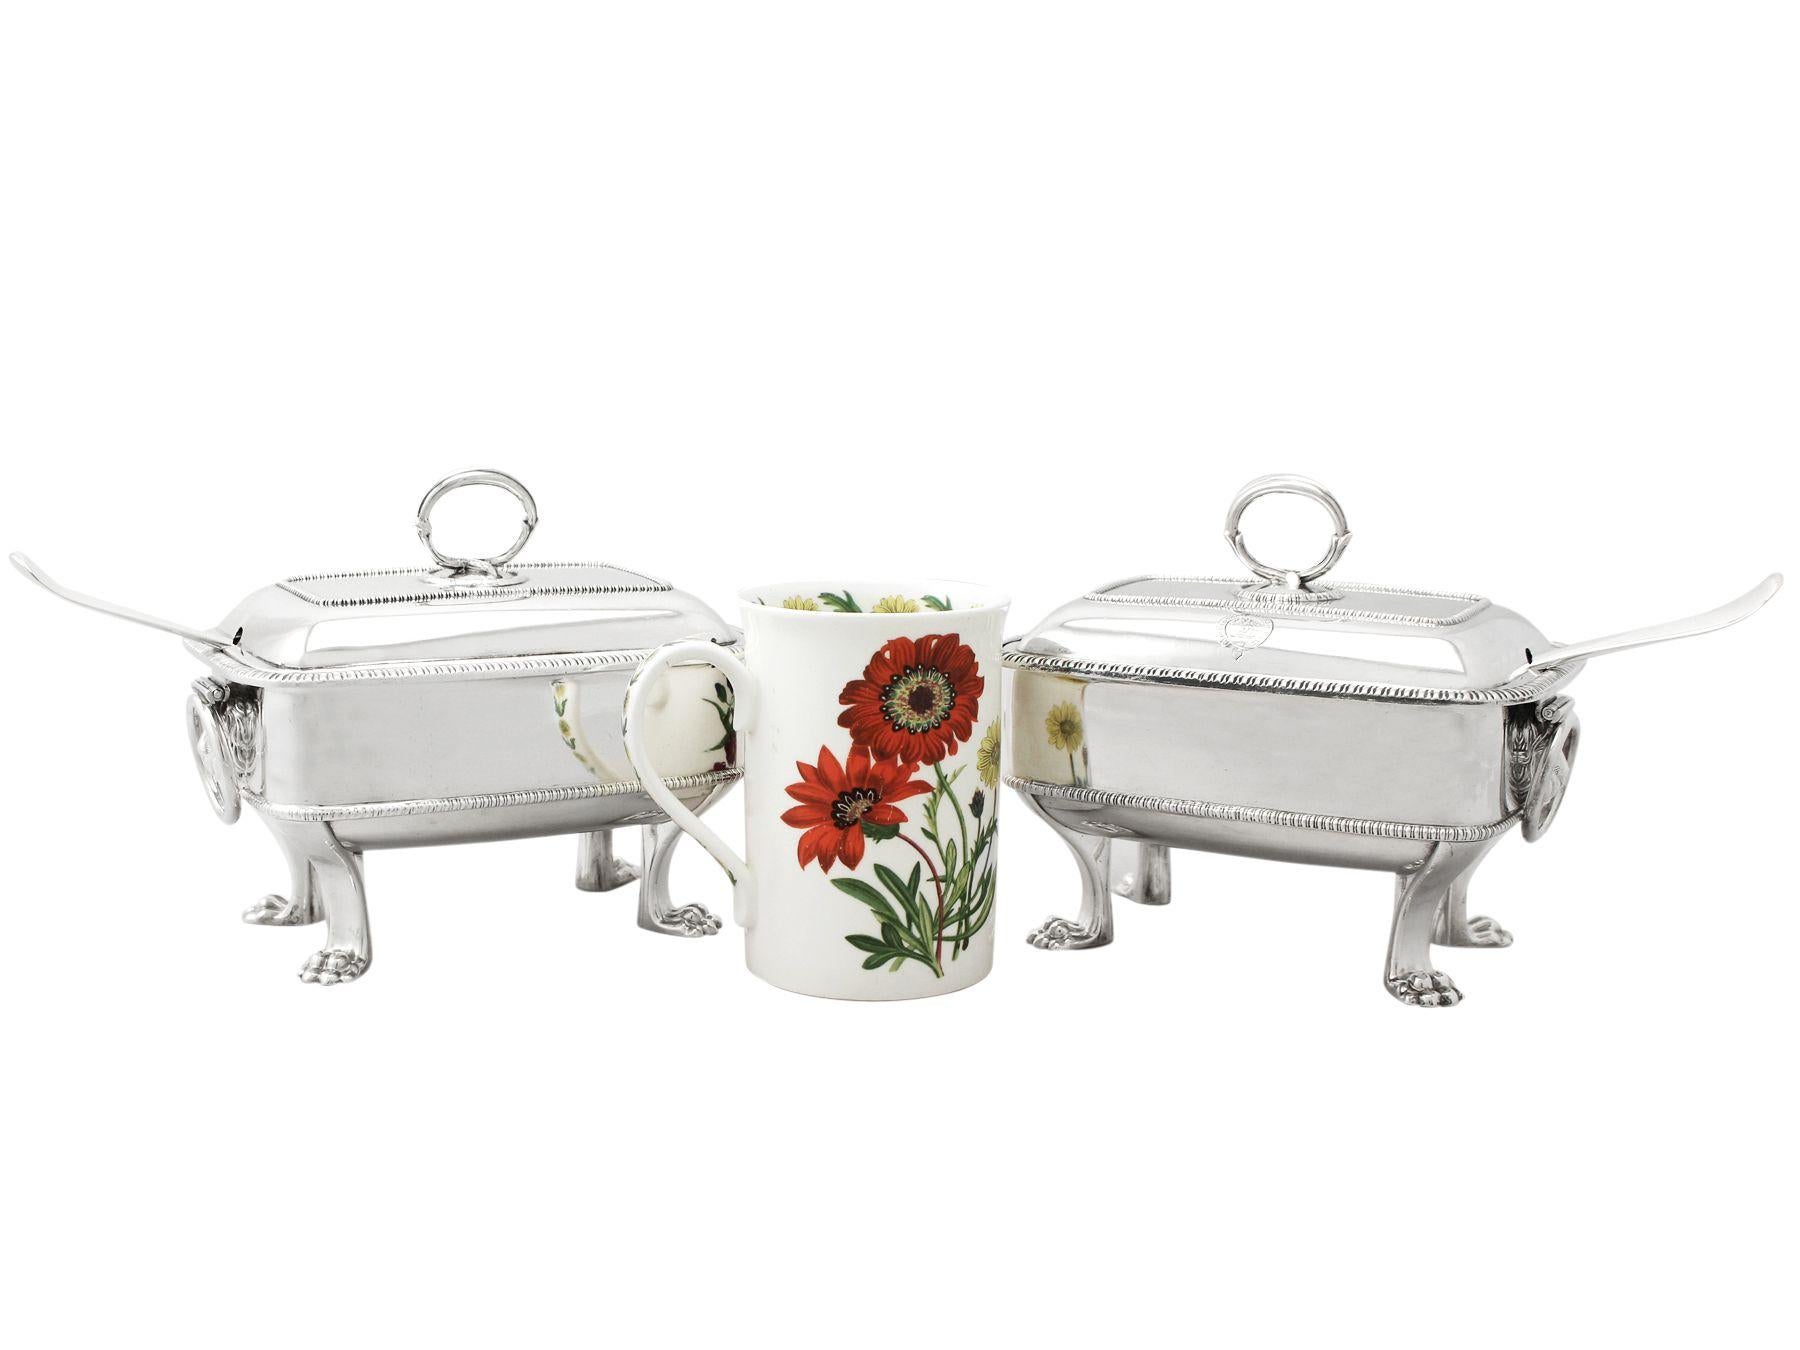 An exceptional, fine and impressive pair of antique George III English sterling silver sauce tureens with ladles; an addition to our Georgian silverware collection.

These exceptional antique George III sterling silver sauce tureens have a plain